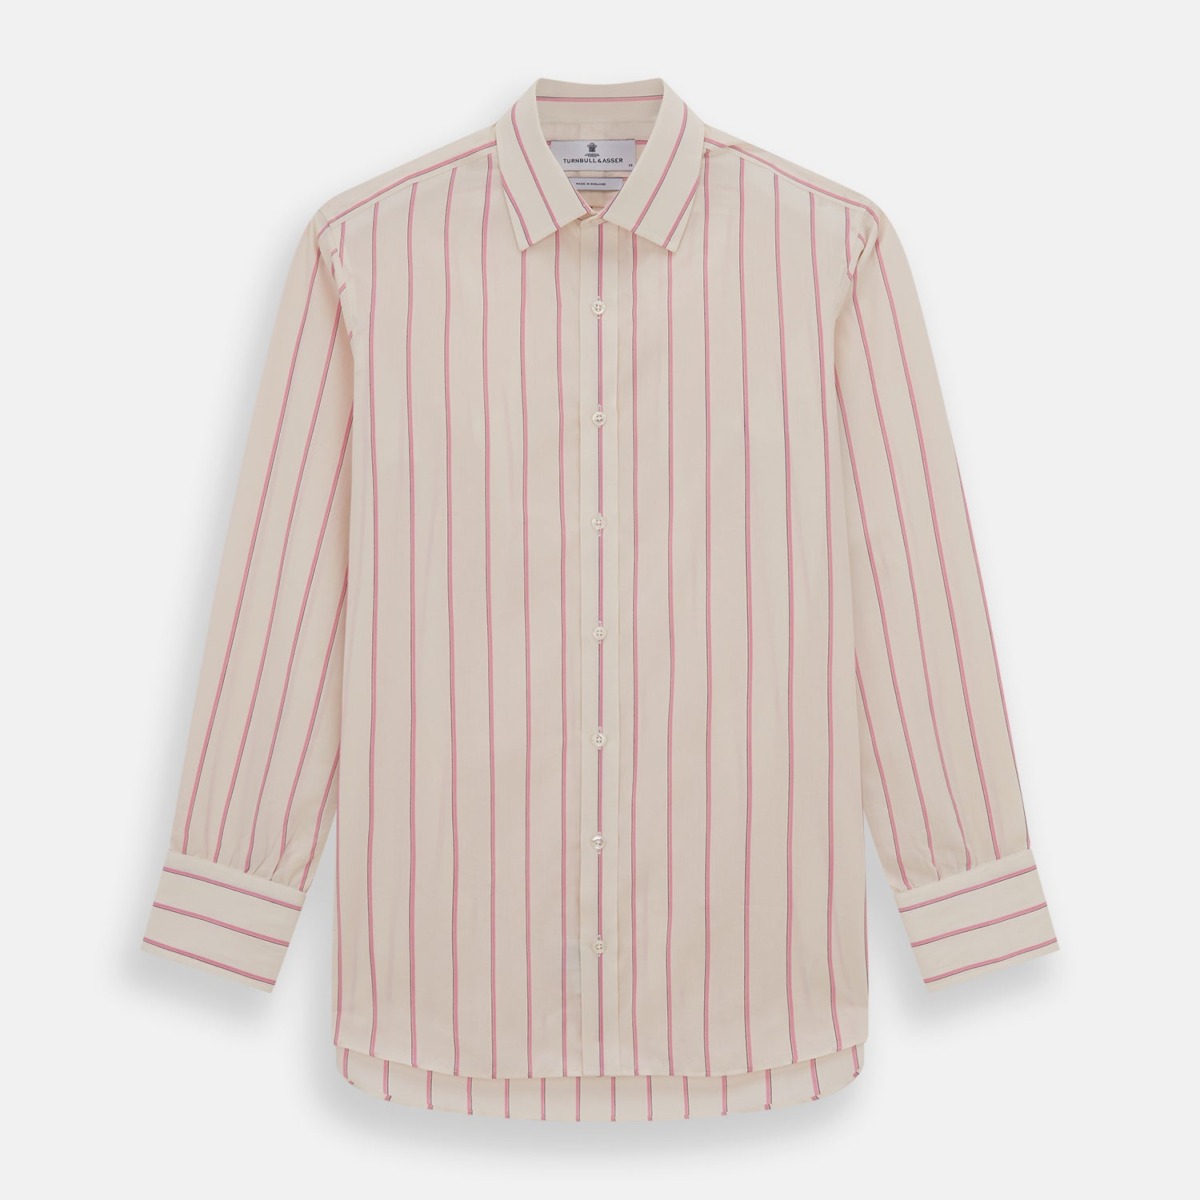 Turnbull & Asser Gents Shirt Pink at Turnbull And Asser GOOFASH